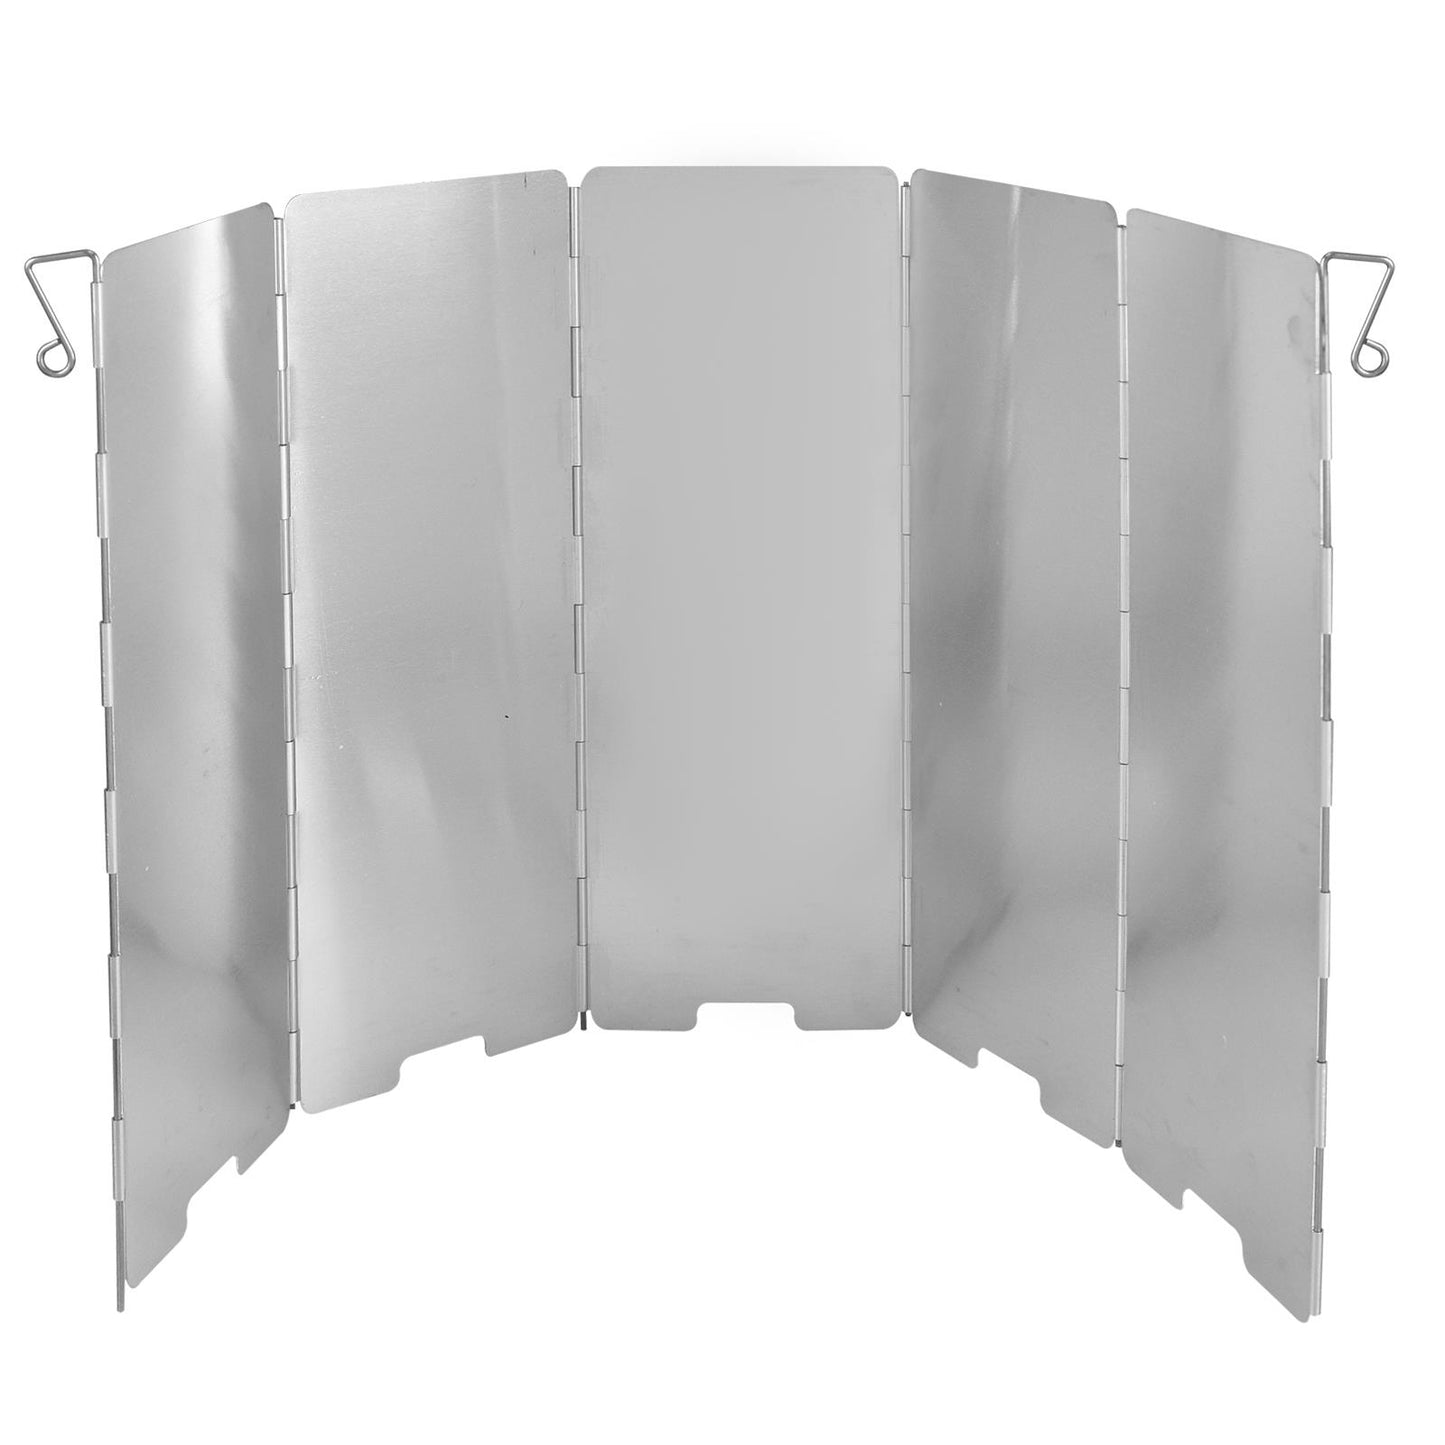 Set Of 5 Aluminum Wind Shields For Portable Stoves